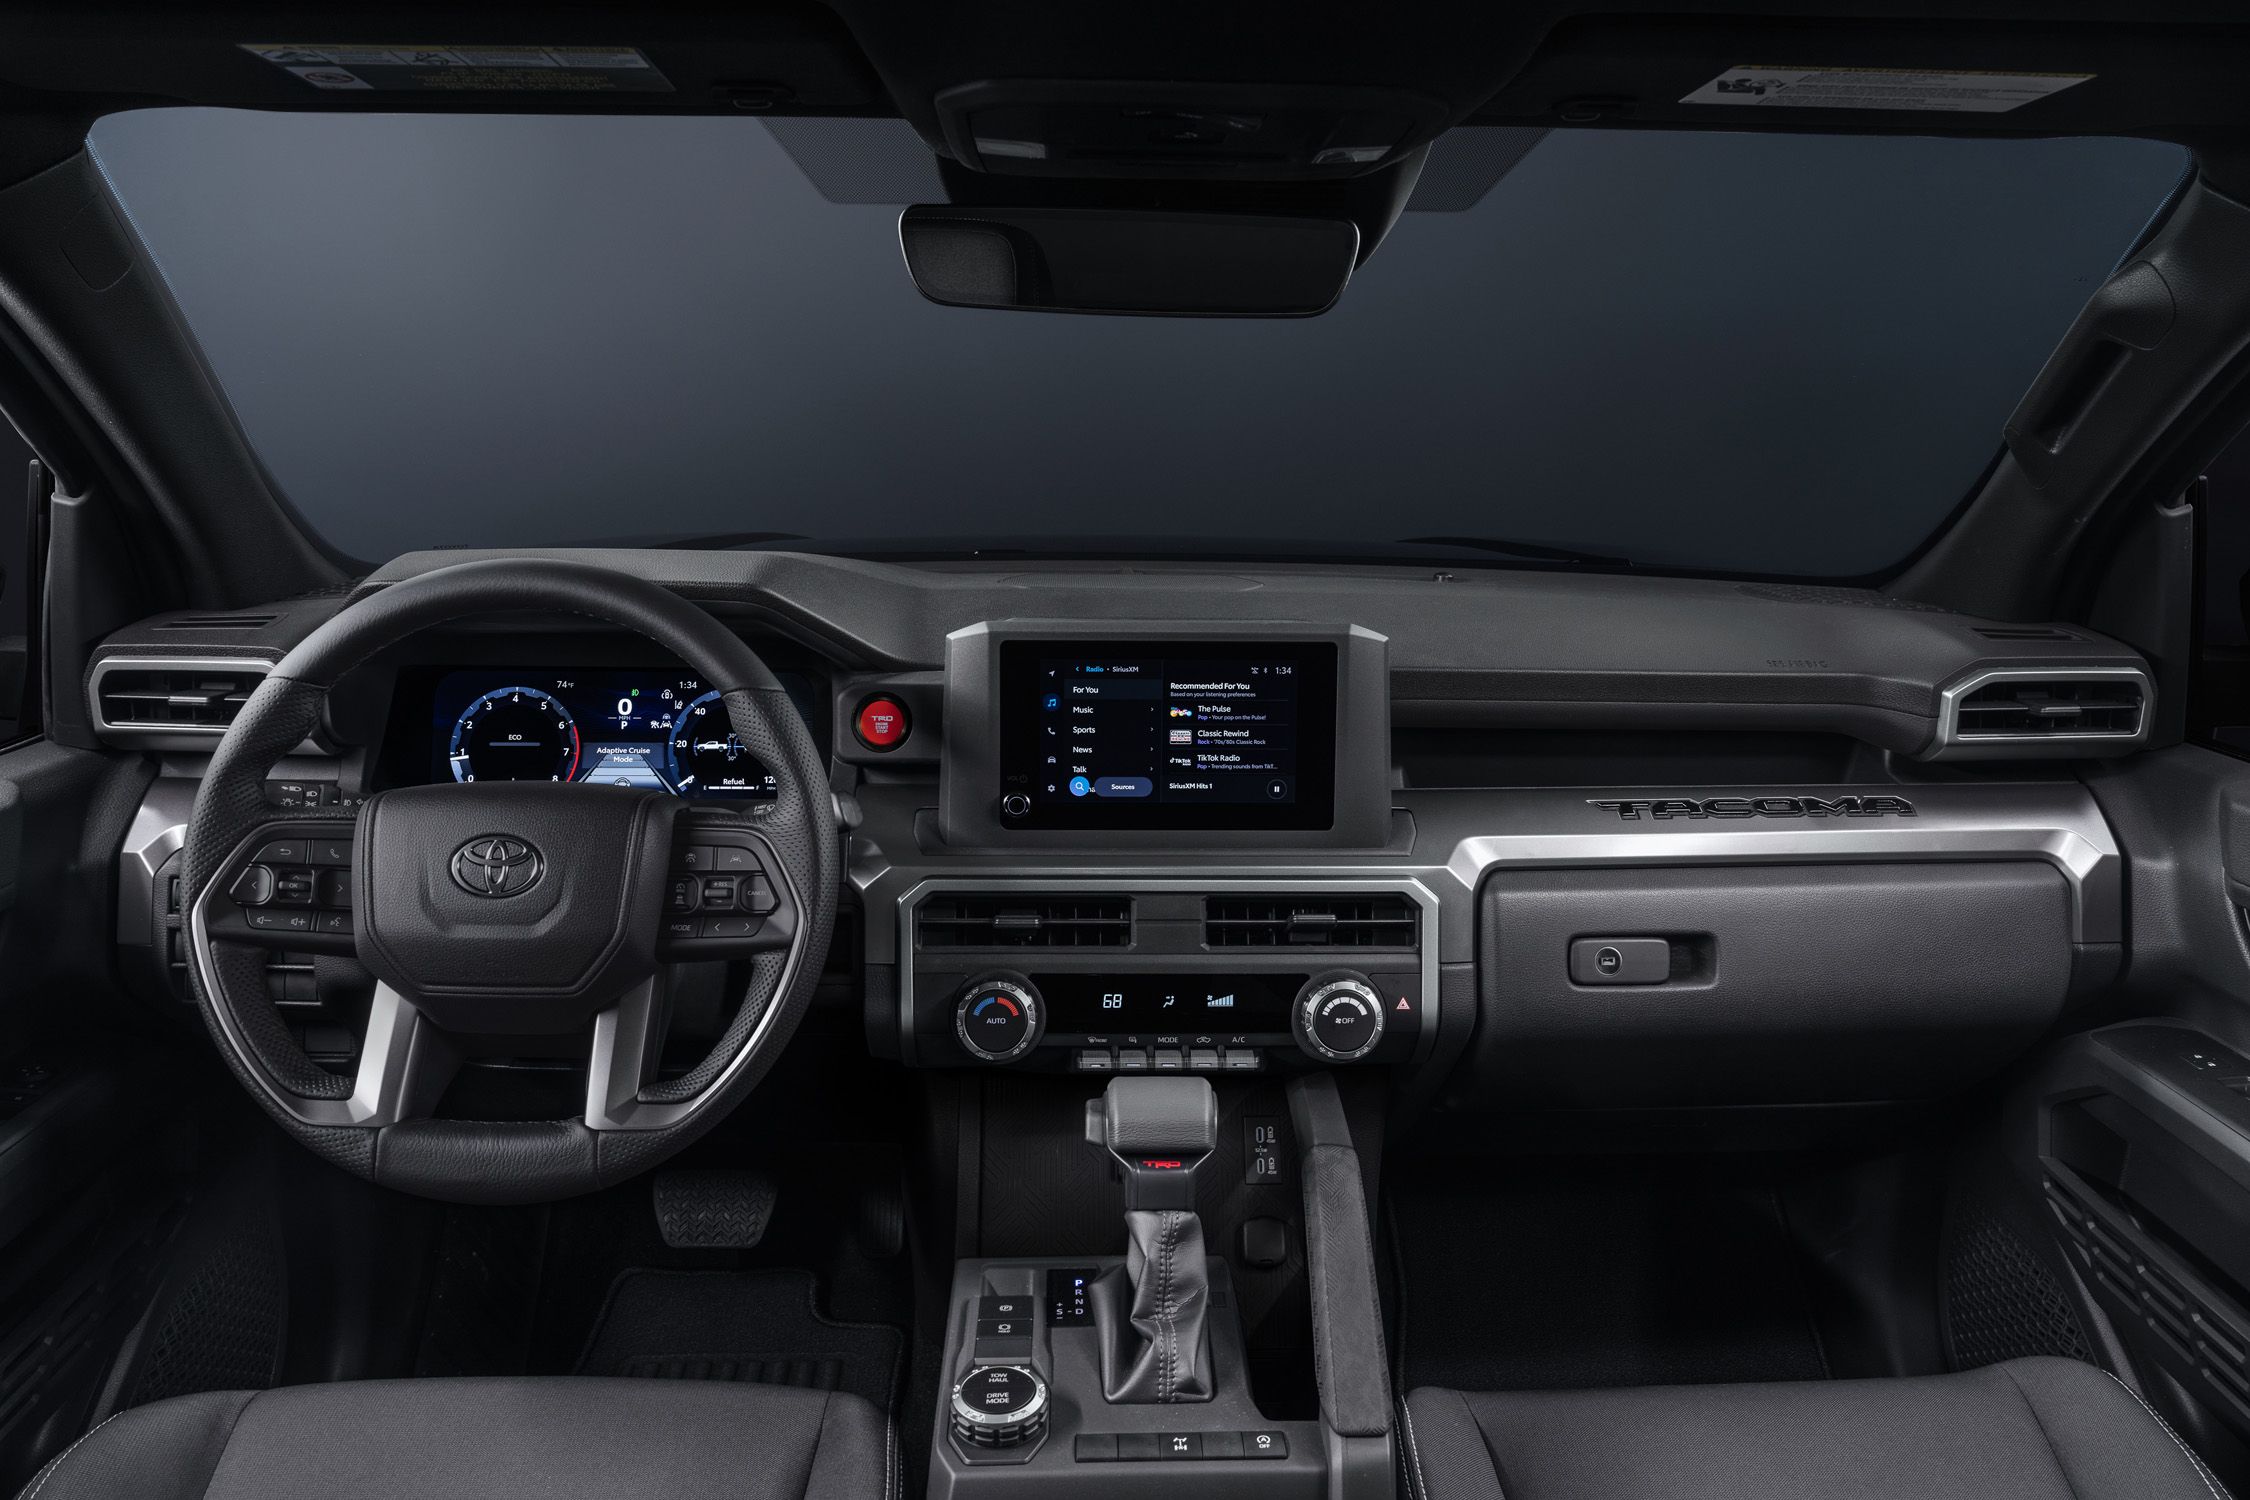 2024 Tacoma Which 2024 Tacoma trim do you plan to buy? 2024-toyota-tacoma-trd-prerunner-103-6463cca823ddc